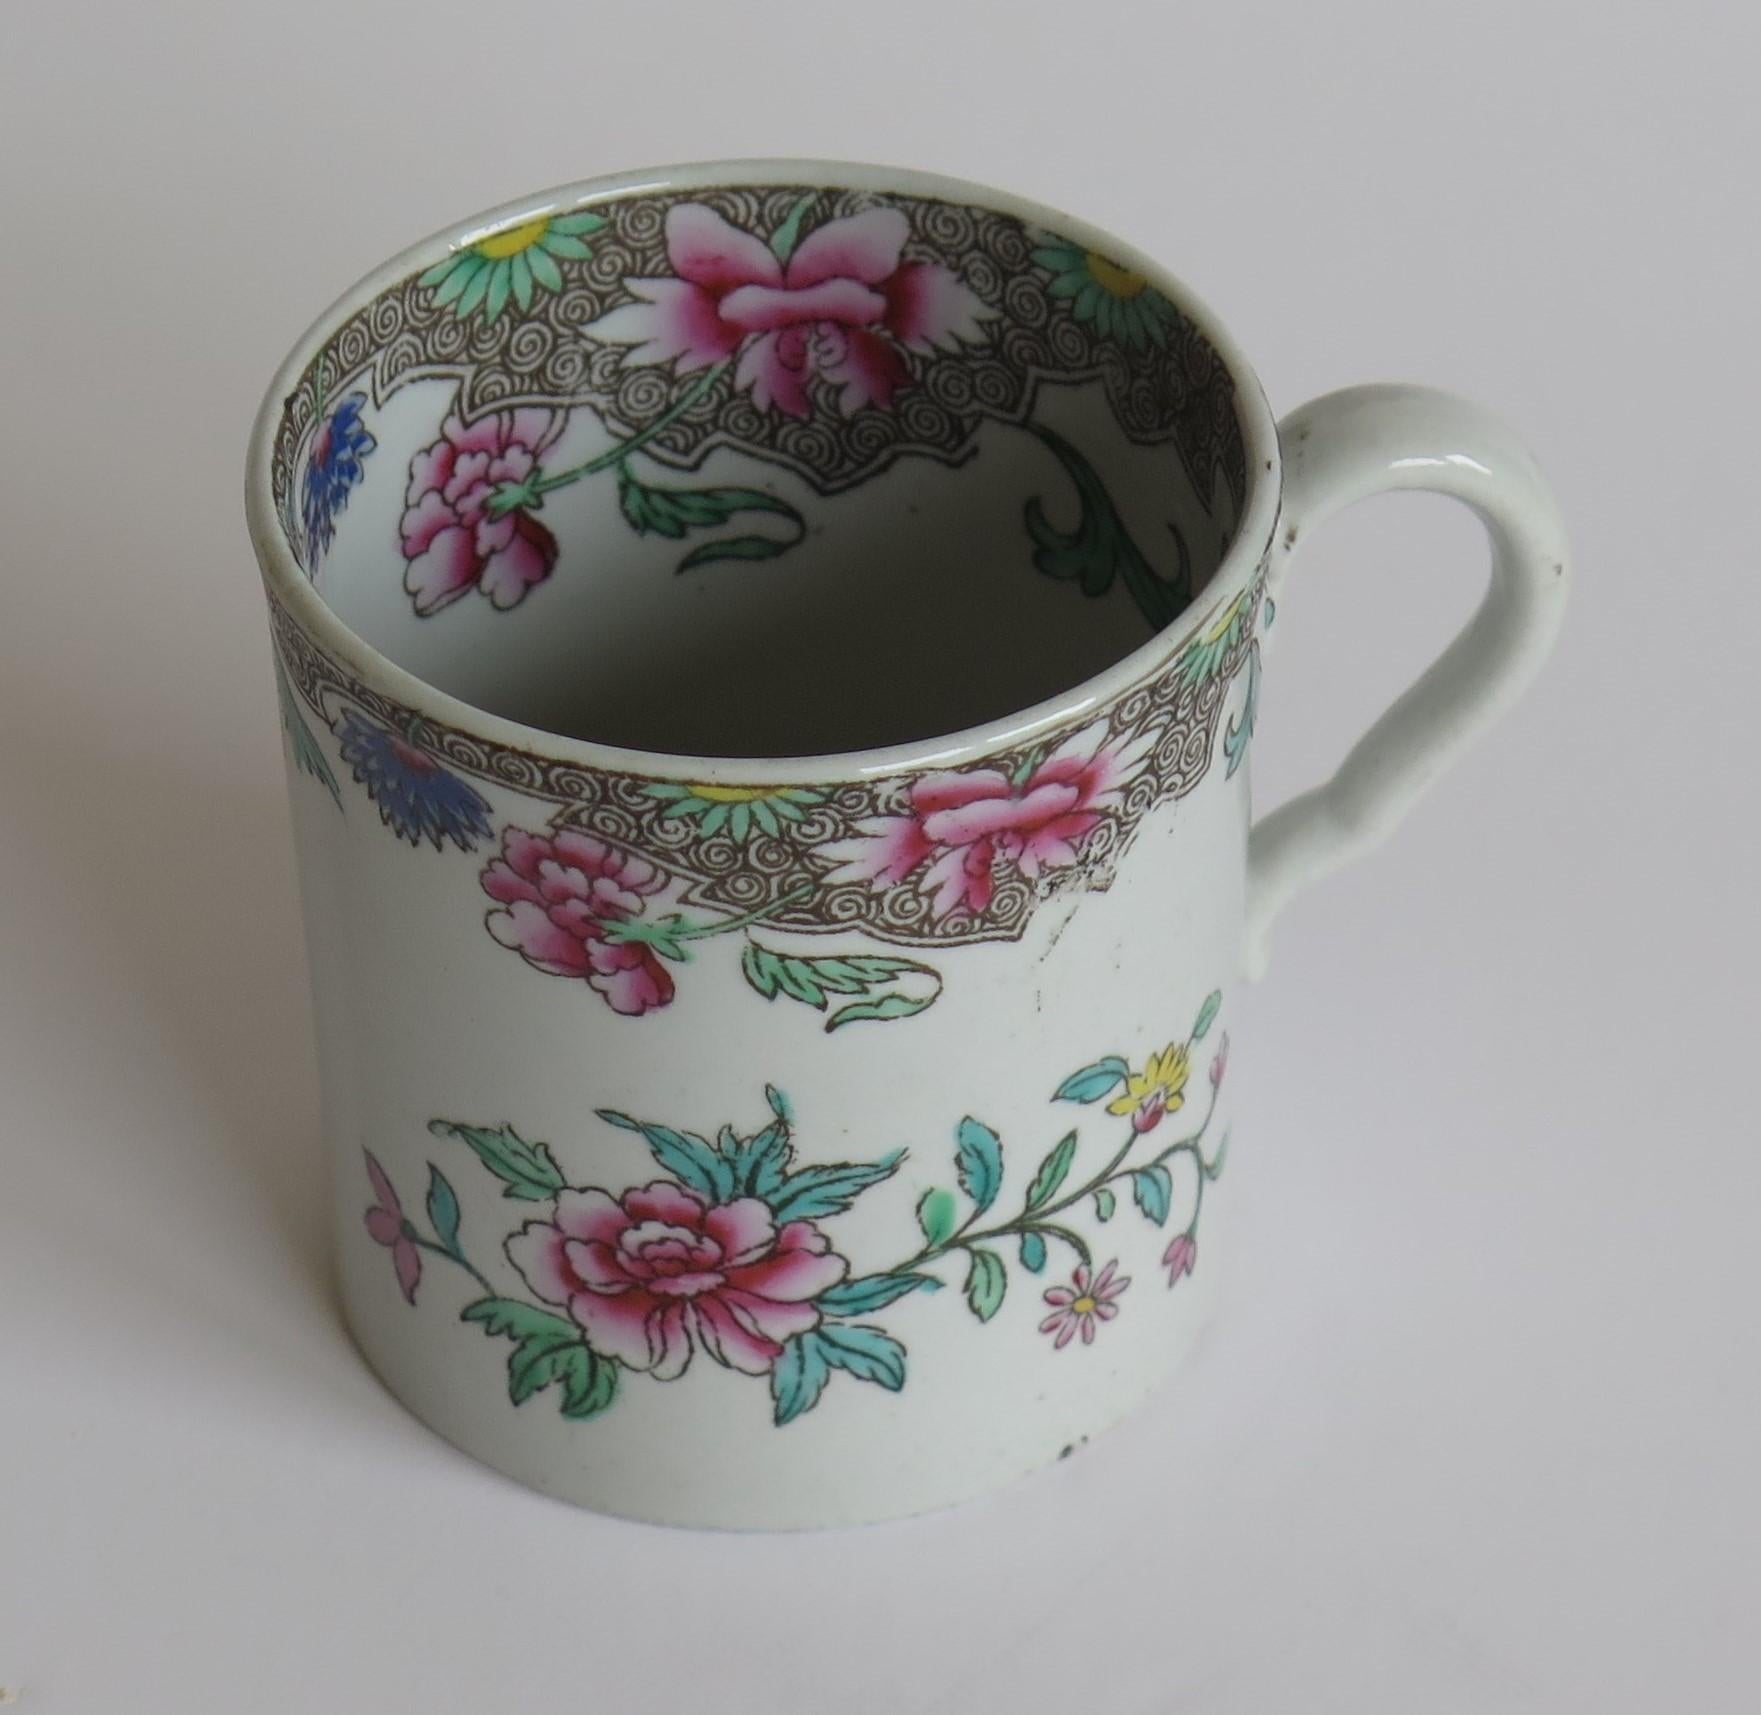 This is a good ironstone coffee can made by the Spode factory in the early 19th century, Georgian period, circa 1810.

The cup is well potted with Spode's distinctive loop handle having the kink in the loop above the lower attachment.

This